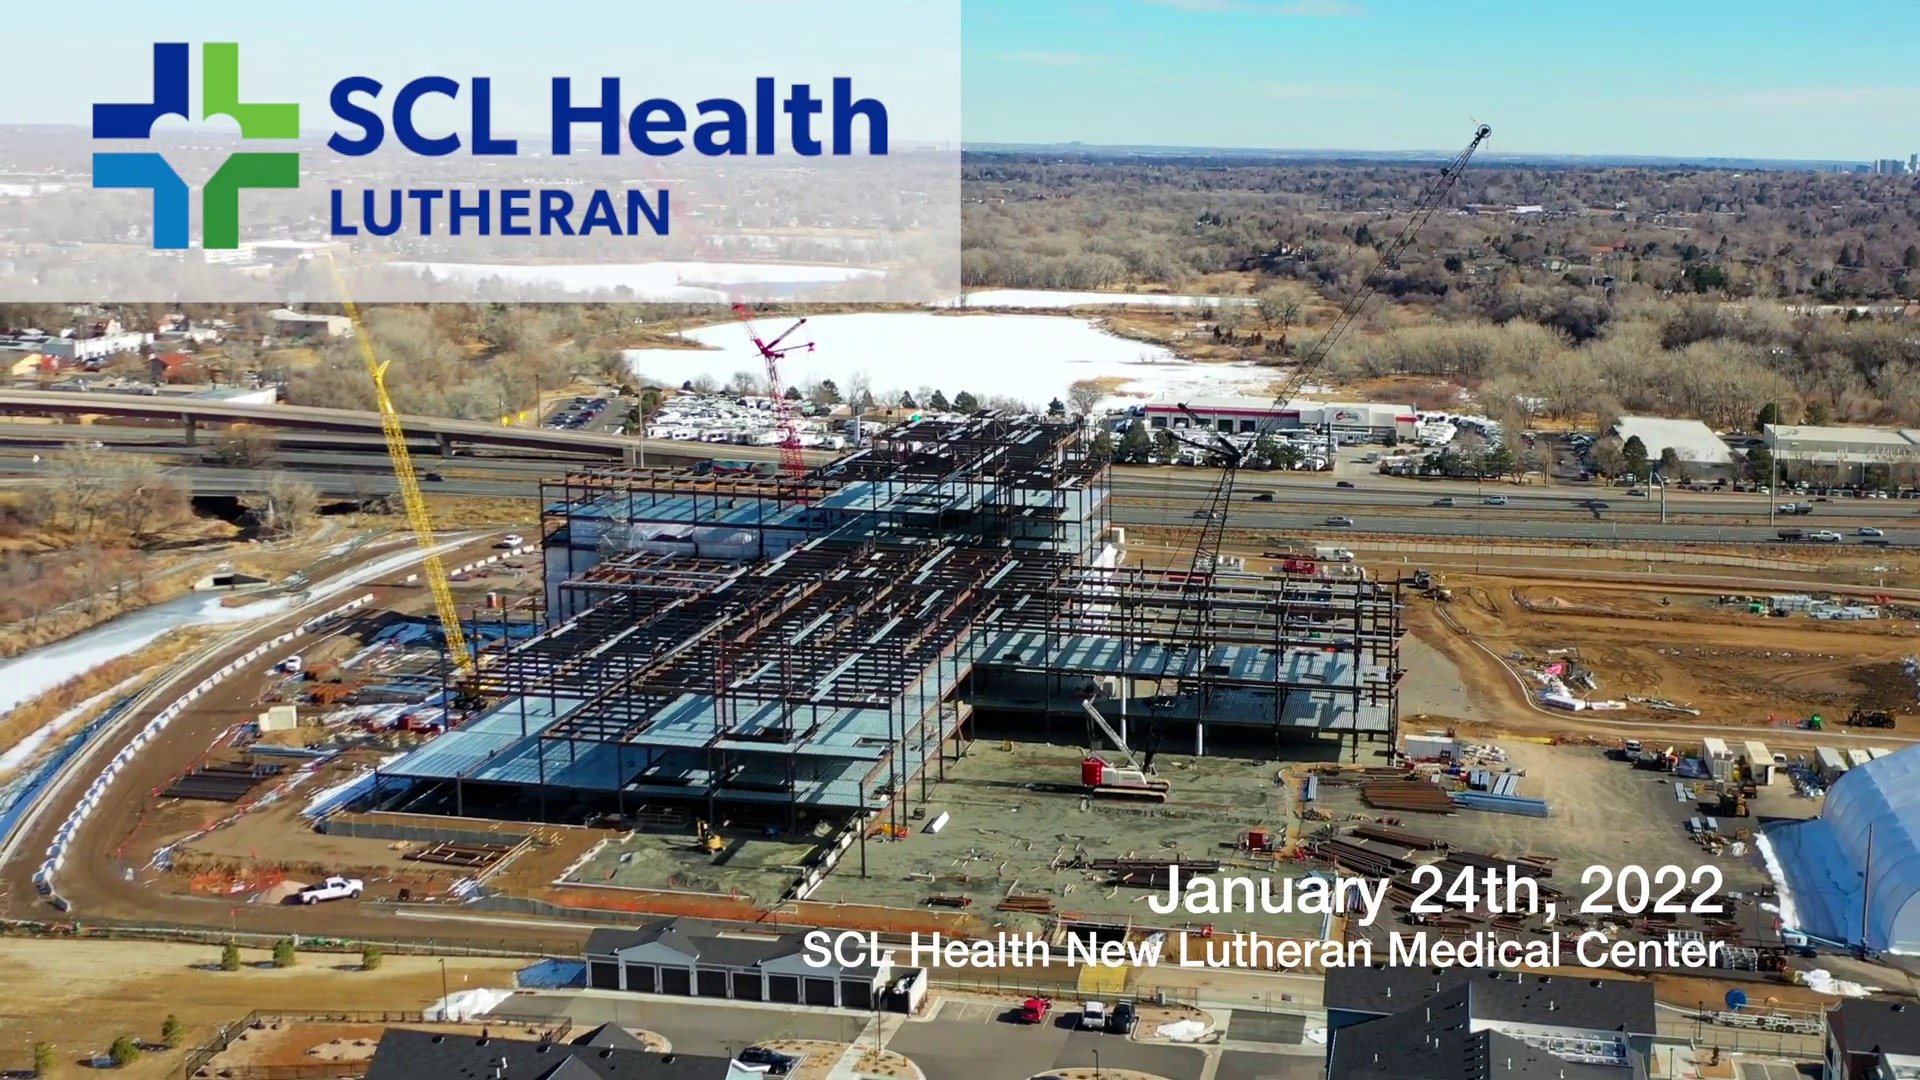 Construction-Entrance-Trackout-Control-Construction-Exit-BMP-VTP-Vehicle-Tracking-Pad-Reusable-Construction-Entrance-Trackout-Control-Mat-System-Installed-At-SCL-Health-Intermountain-Health-4.jpeg